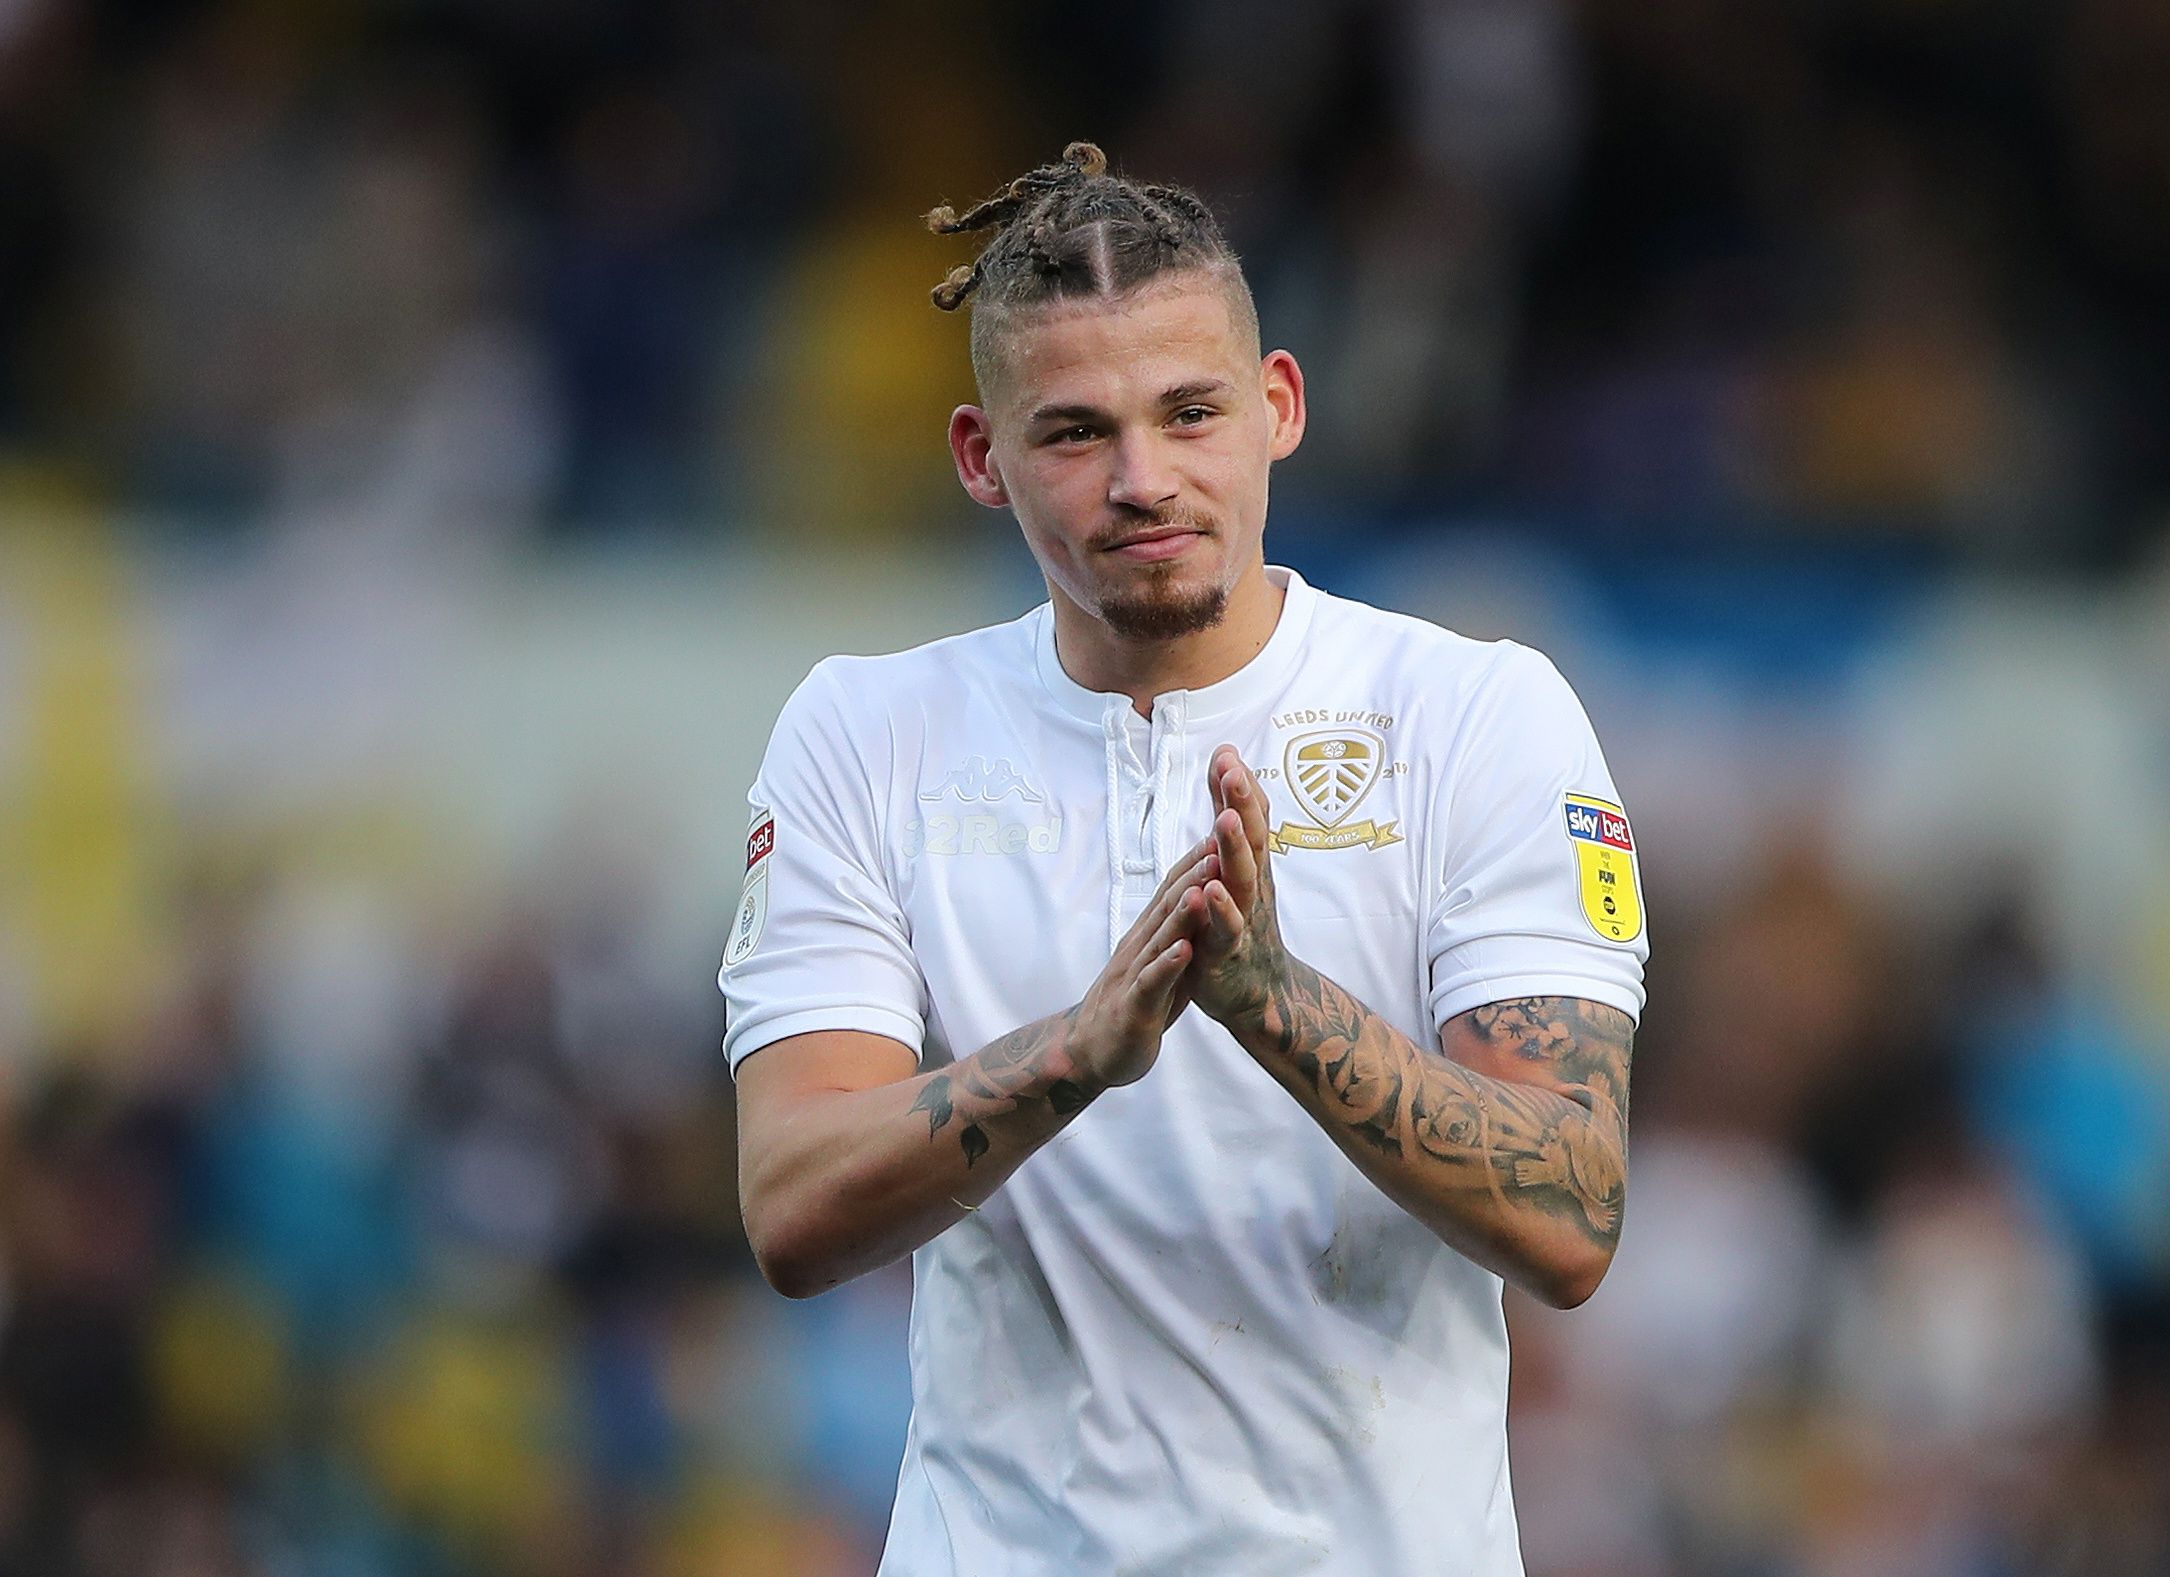 Soccer Football - Championship - Leeds United v Birmingham City - Elland Road, Leeds, Britain - October 19, 2019   Leeds United's Kalvin Phillips after the match    Action Images/Molly Darlington    EDITORIAL USE ONLY. No use with unauthorized audio, video, data, fixture lists, club/league logos or 